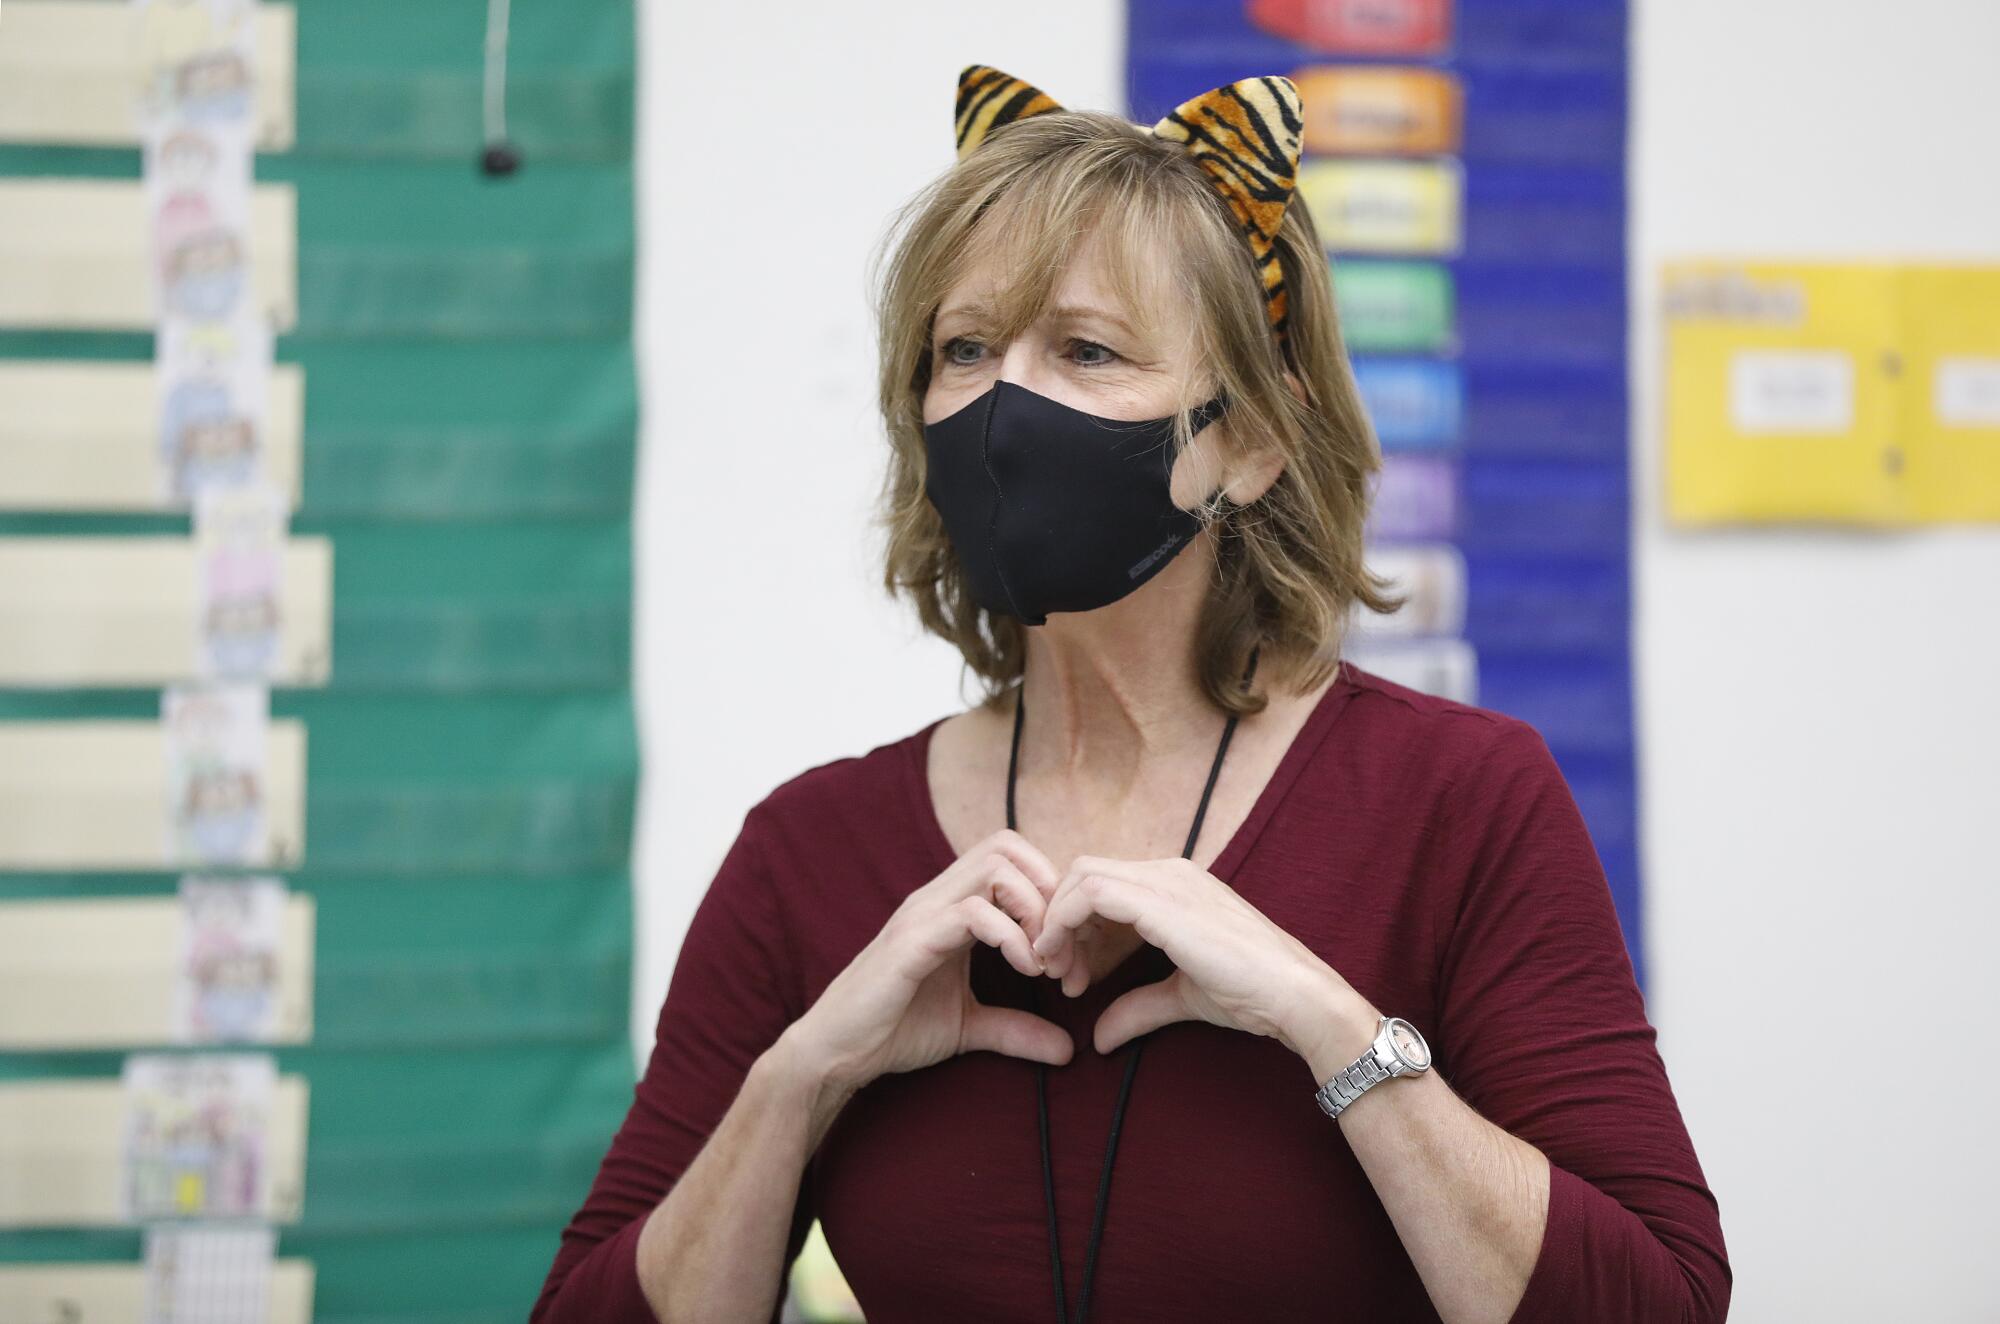 Teacher Jennifer Klein, in mask and cat ears, forms a heart with her hands for students.